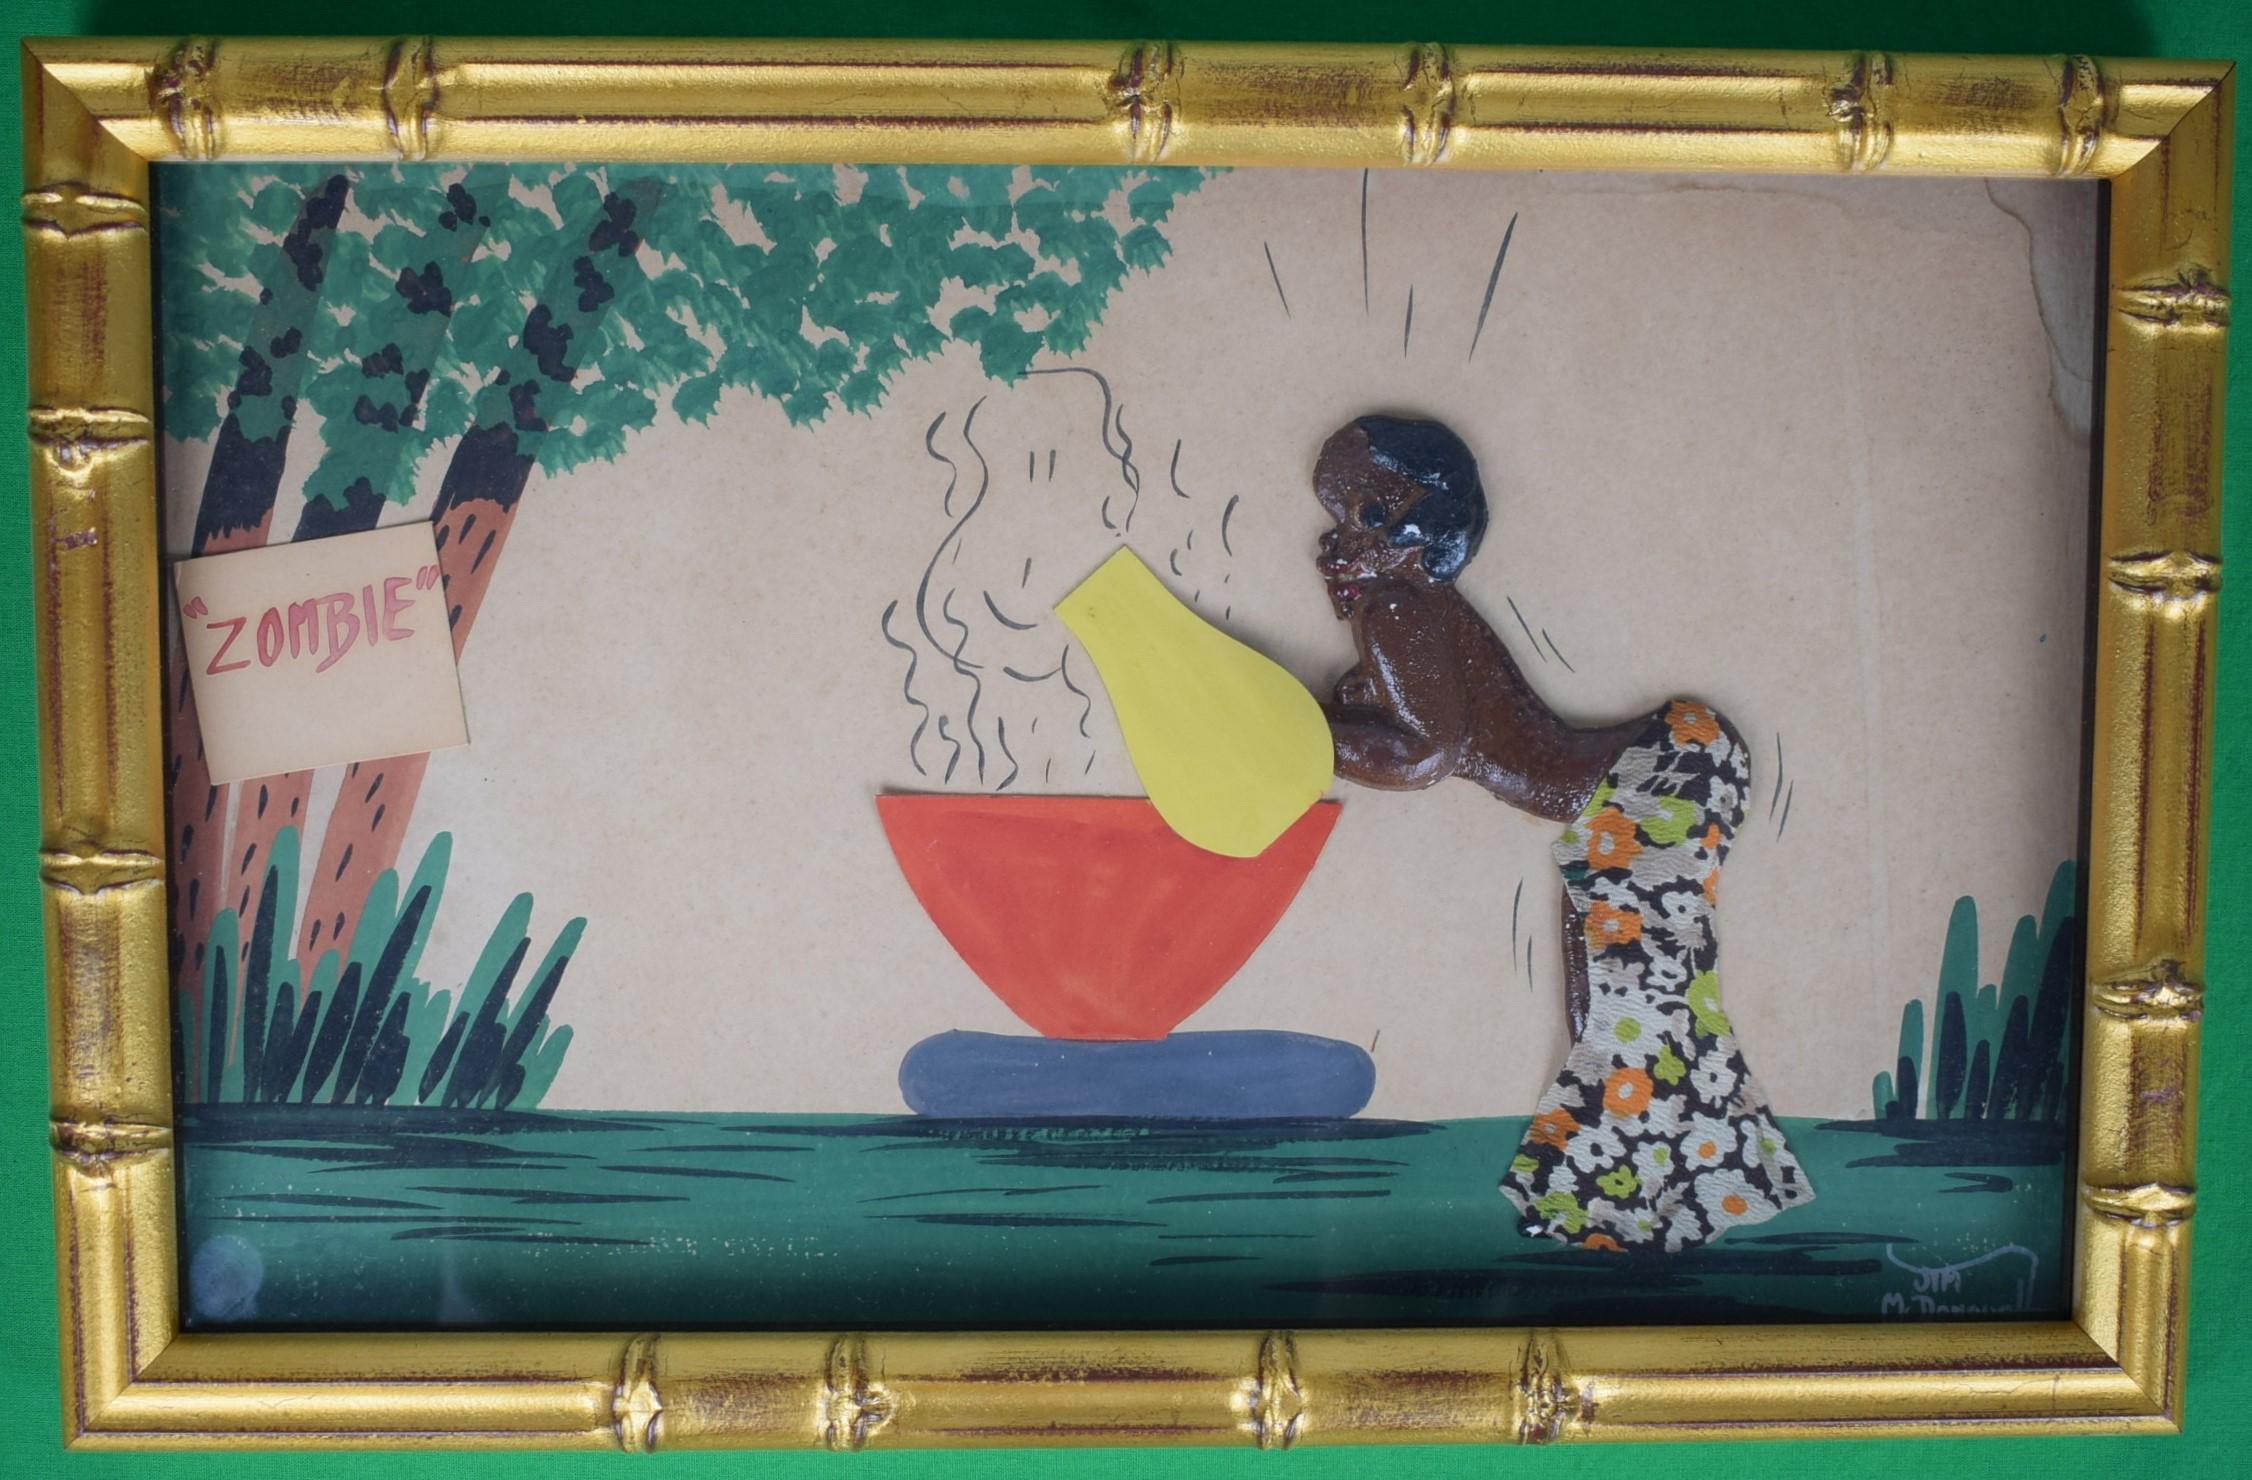 c1930s gouache shadowbox depicting a voodoo kettle brewer concocting a Zombie cocktail signed Jim McDonough (LR) in a gilt bamboo frame

Art Sz: 9 1/8"H x 15 1/4"W

Frame Sz: 11 1/8"H x 17 1/8"W